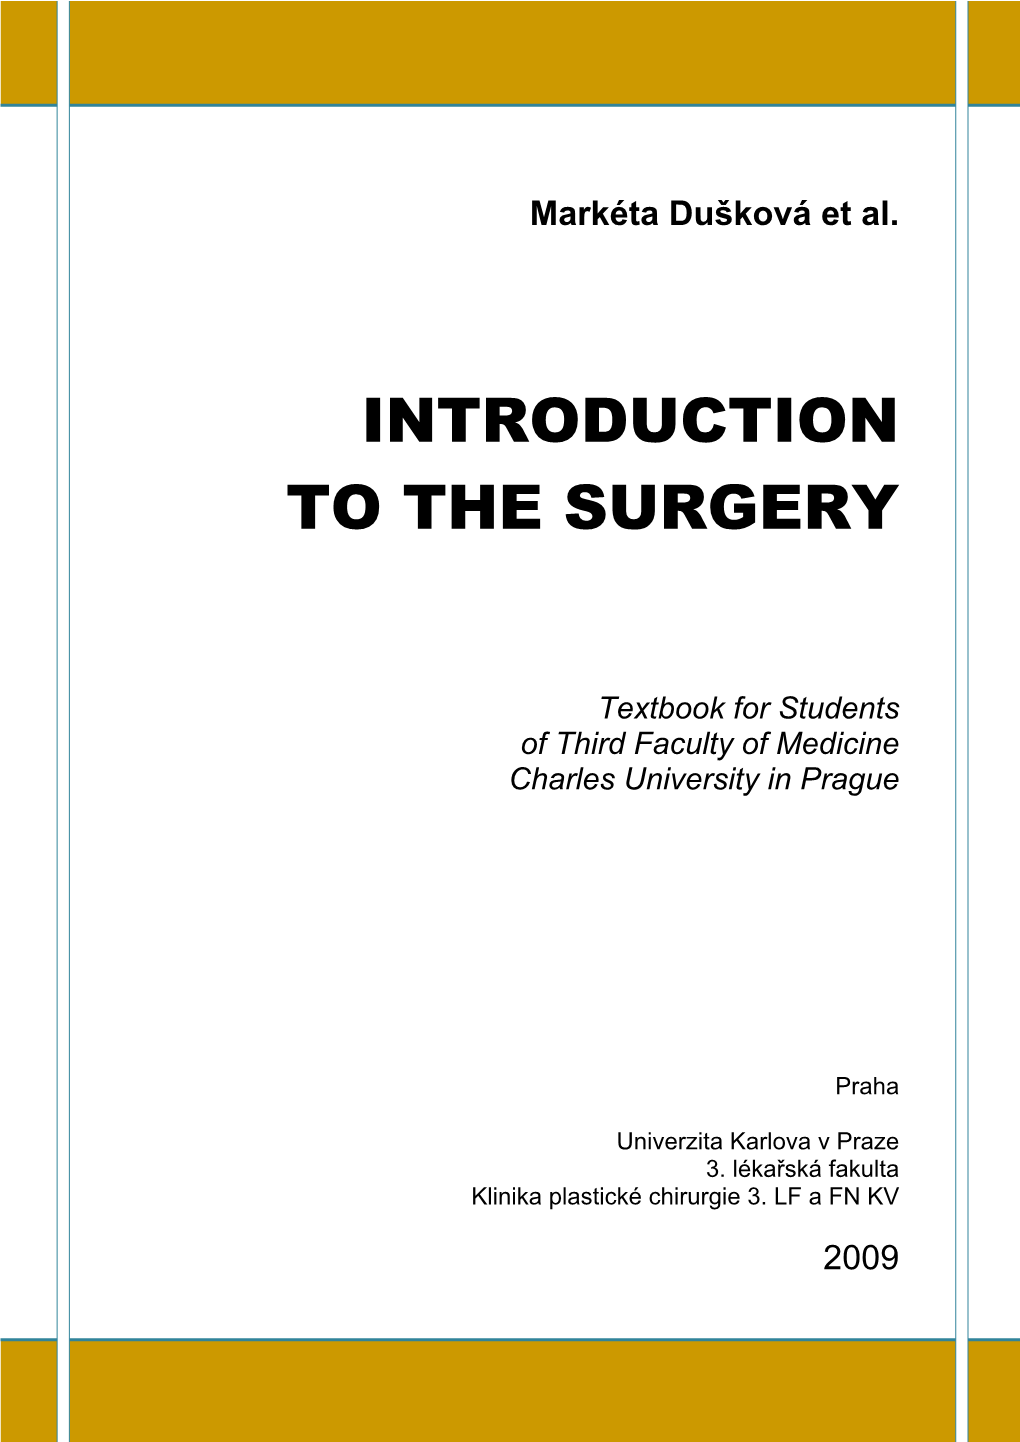 Introduction to the Surgery